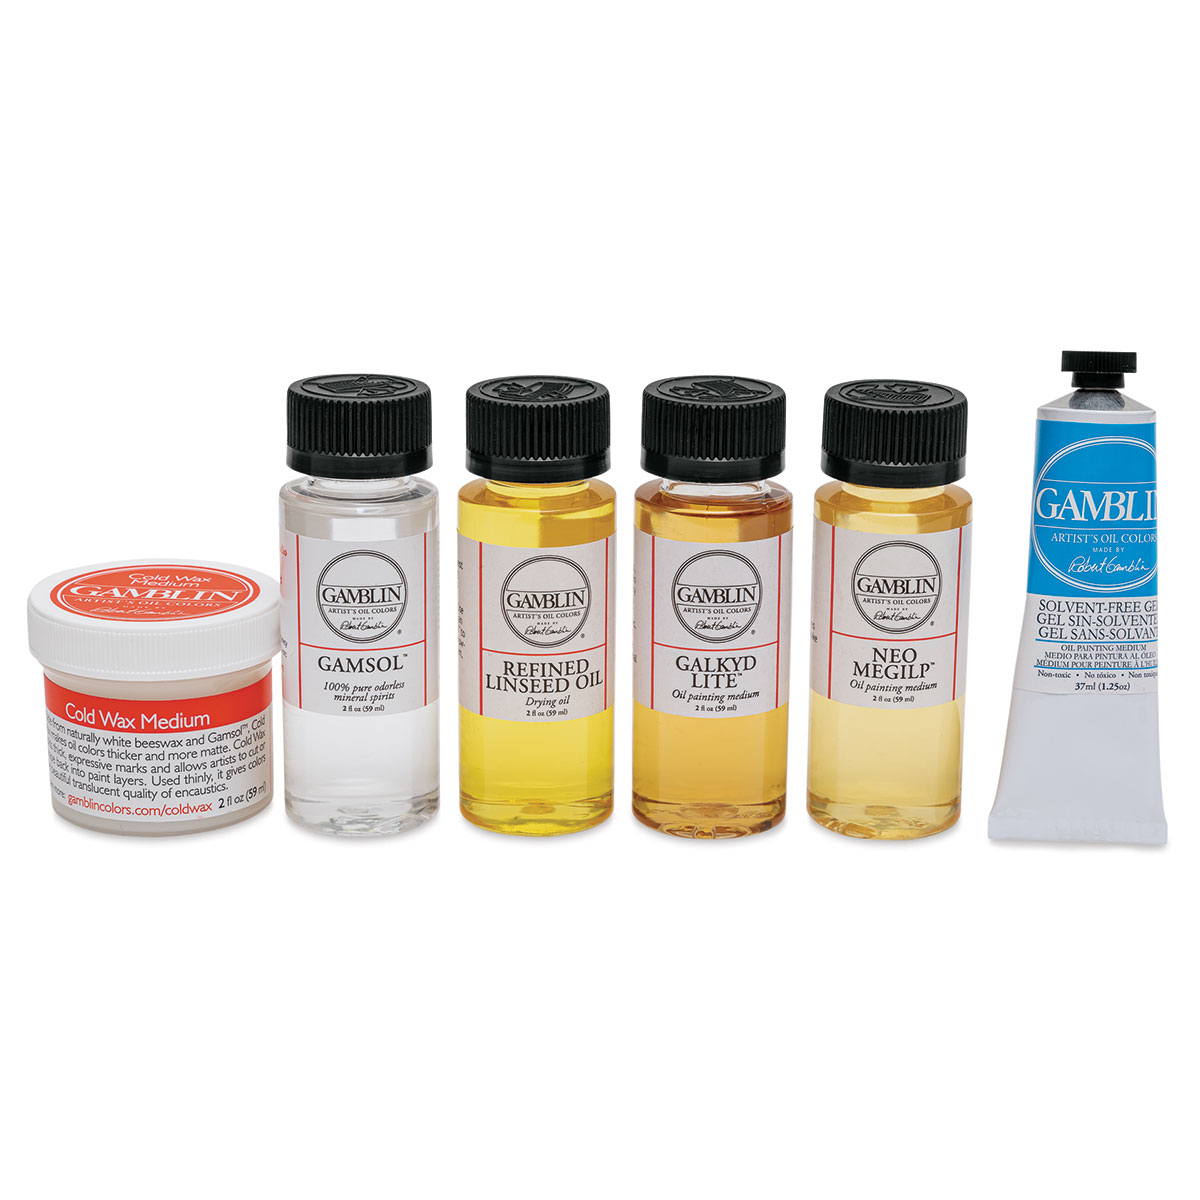 Gamblin Oil Painting Must Haves Sets